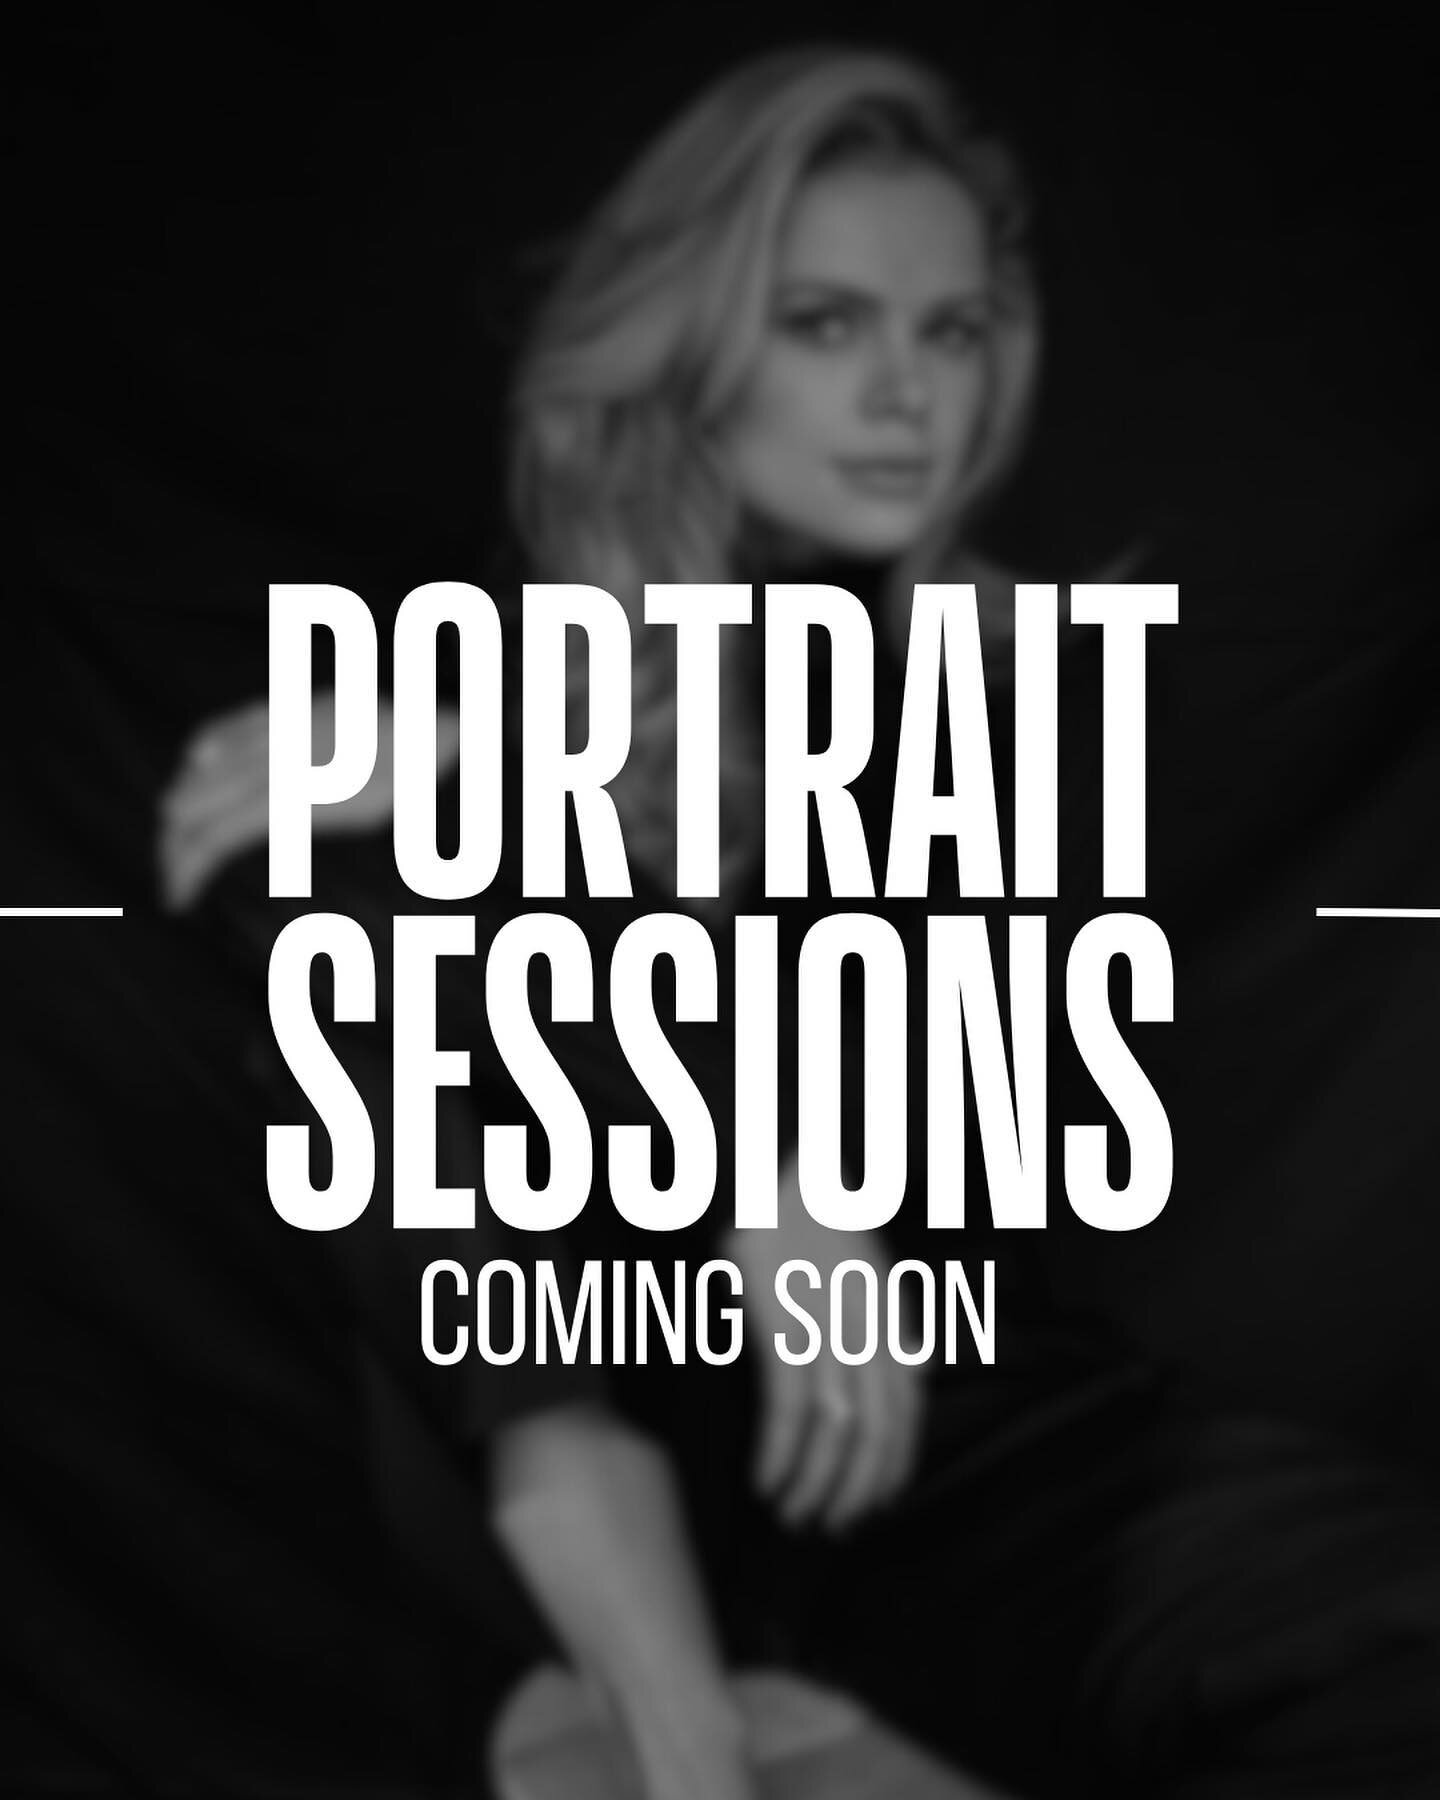 ANNOUNCING: 📸 In-Studio Portrait Sessions. Bookings are NOW OPEN 💃✨ Until midnight tomorrow, Wednesday April 17th, these sessions will be 15% off using the code &ldquo;EARLYBIRD&rdquo; in checkout.

I am really excited about sharing this with you a